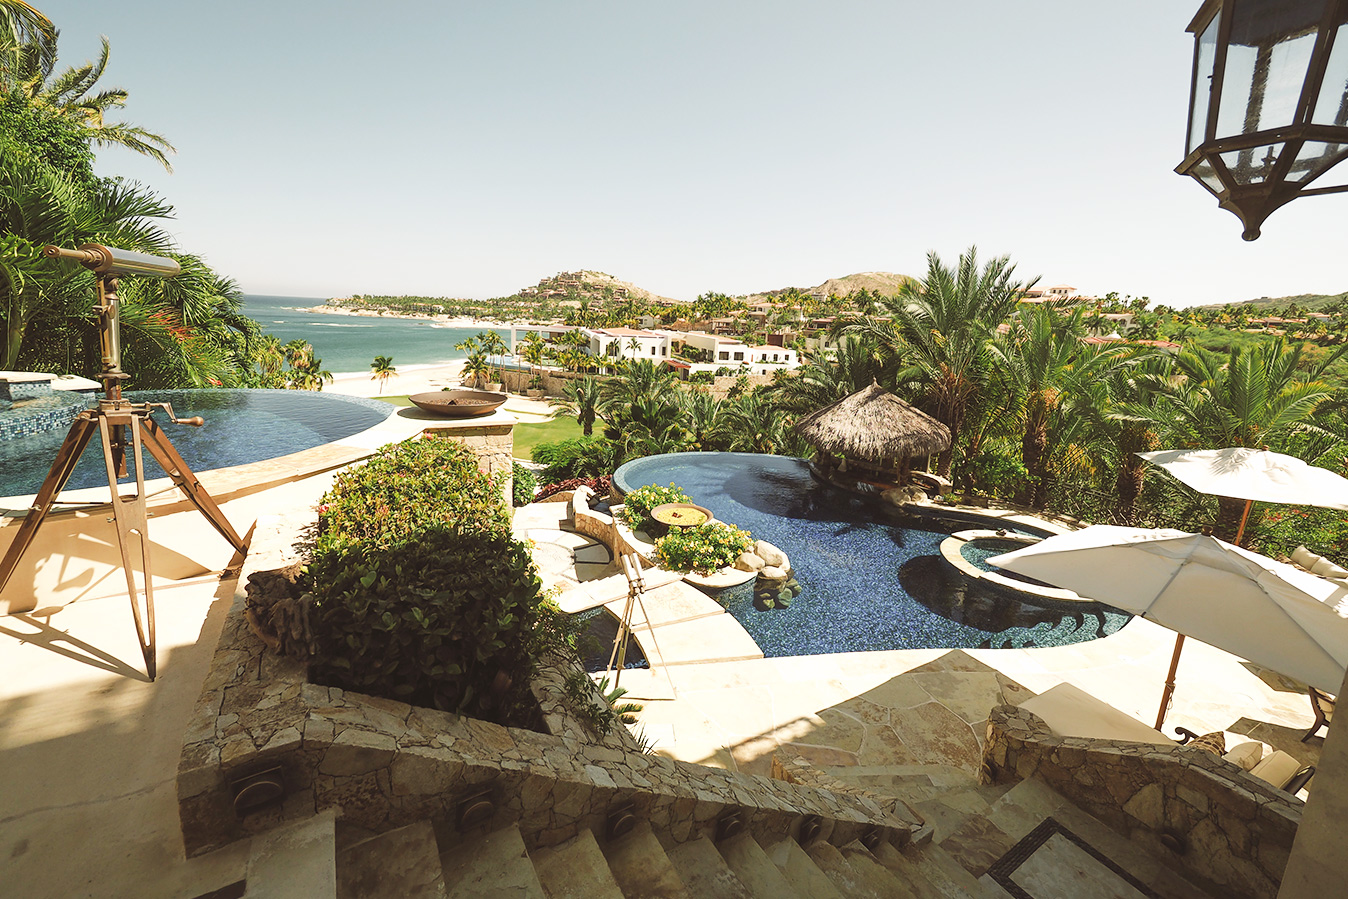 Outdoor Pool Area at this Beachfront Vacation Home in Los Cabos